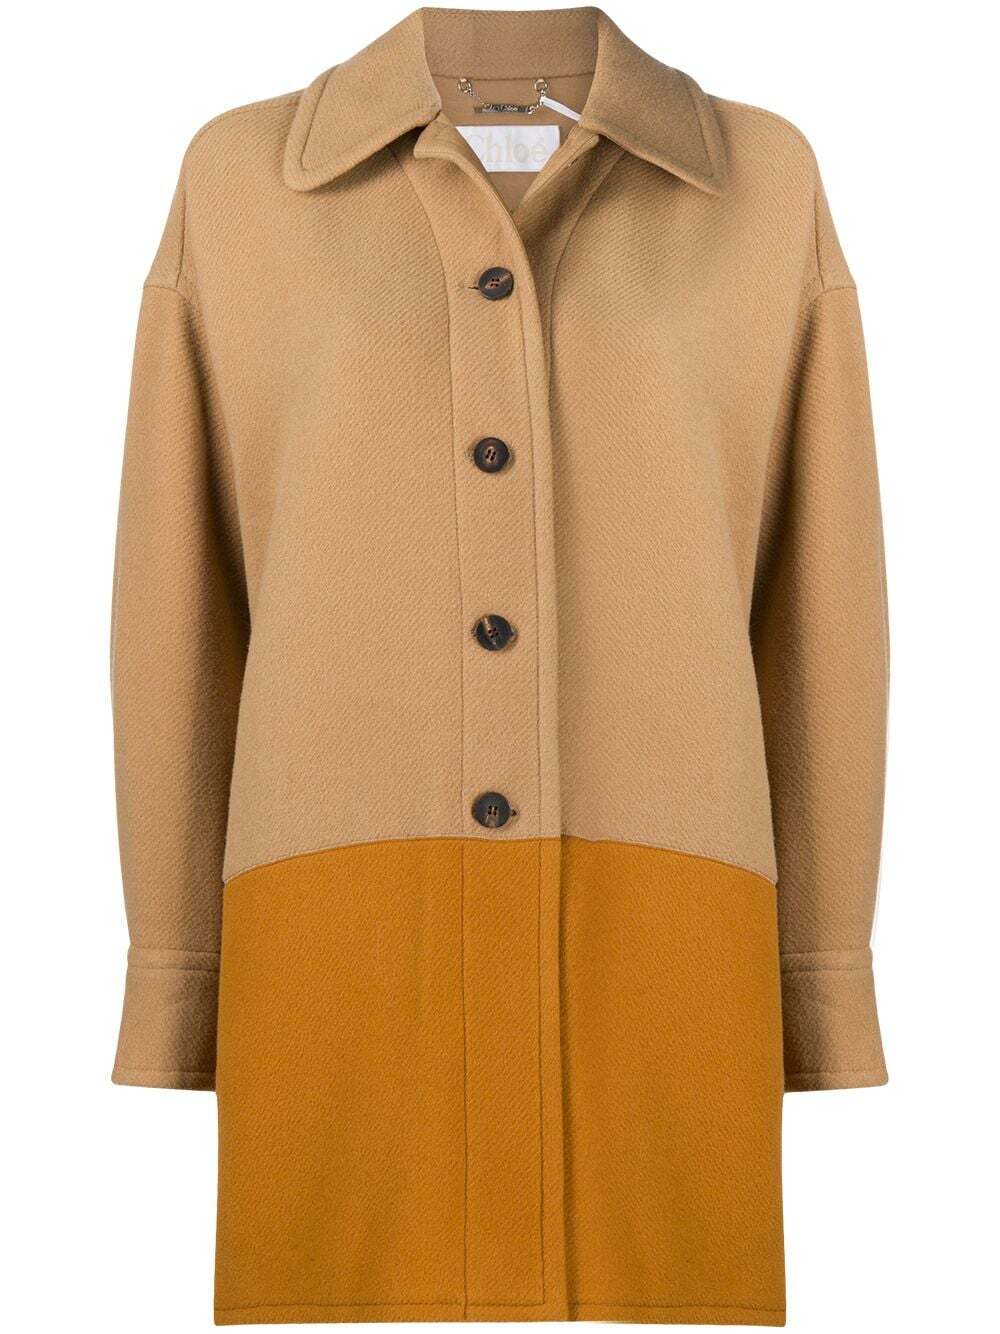 Two color coat with button placket